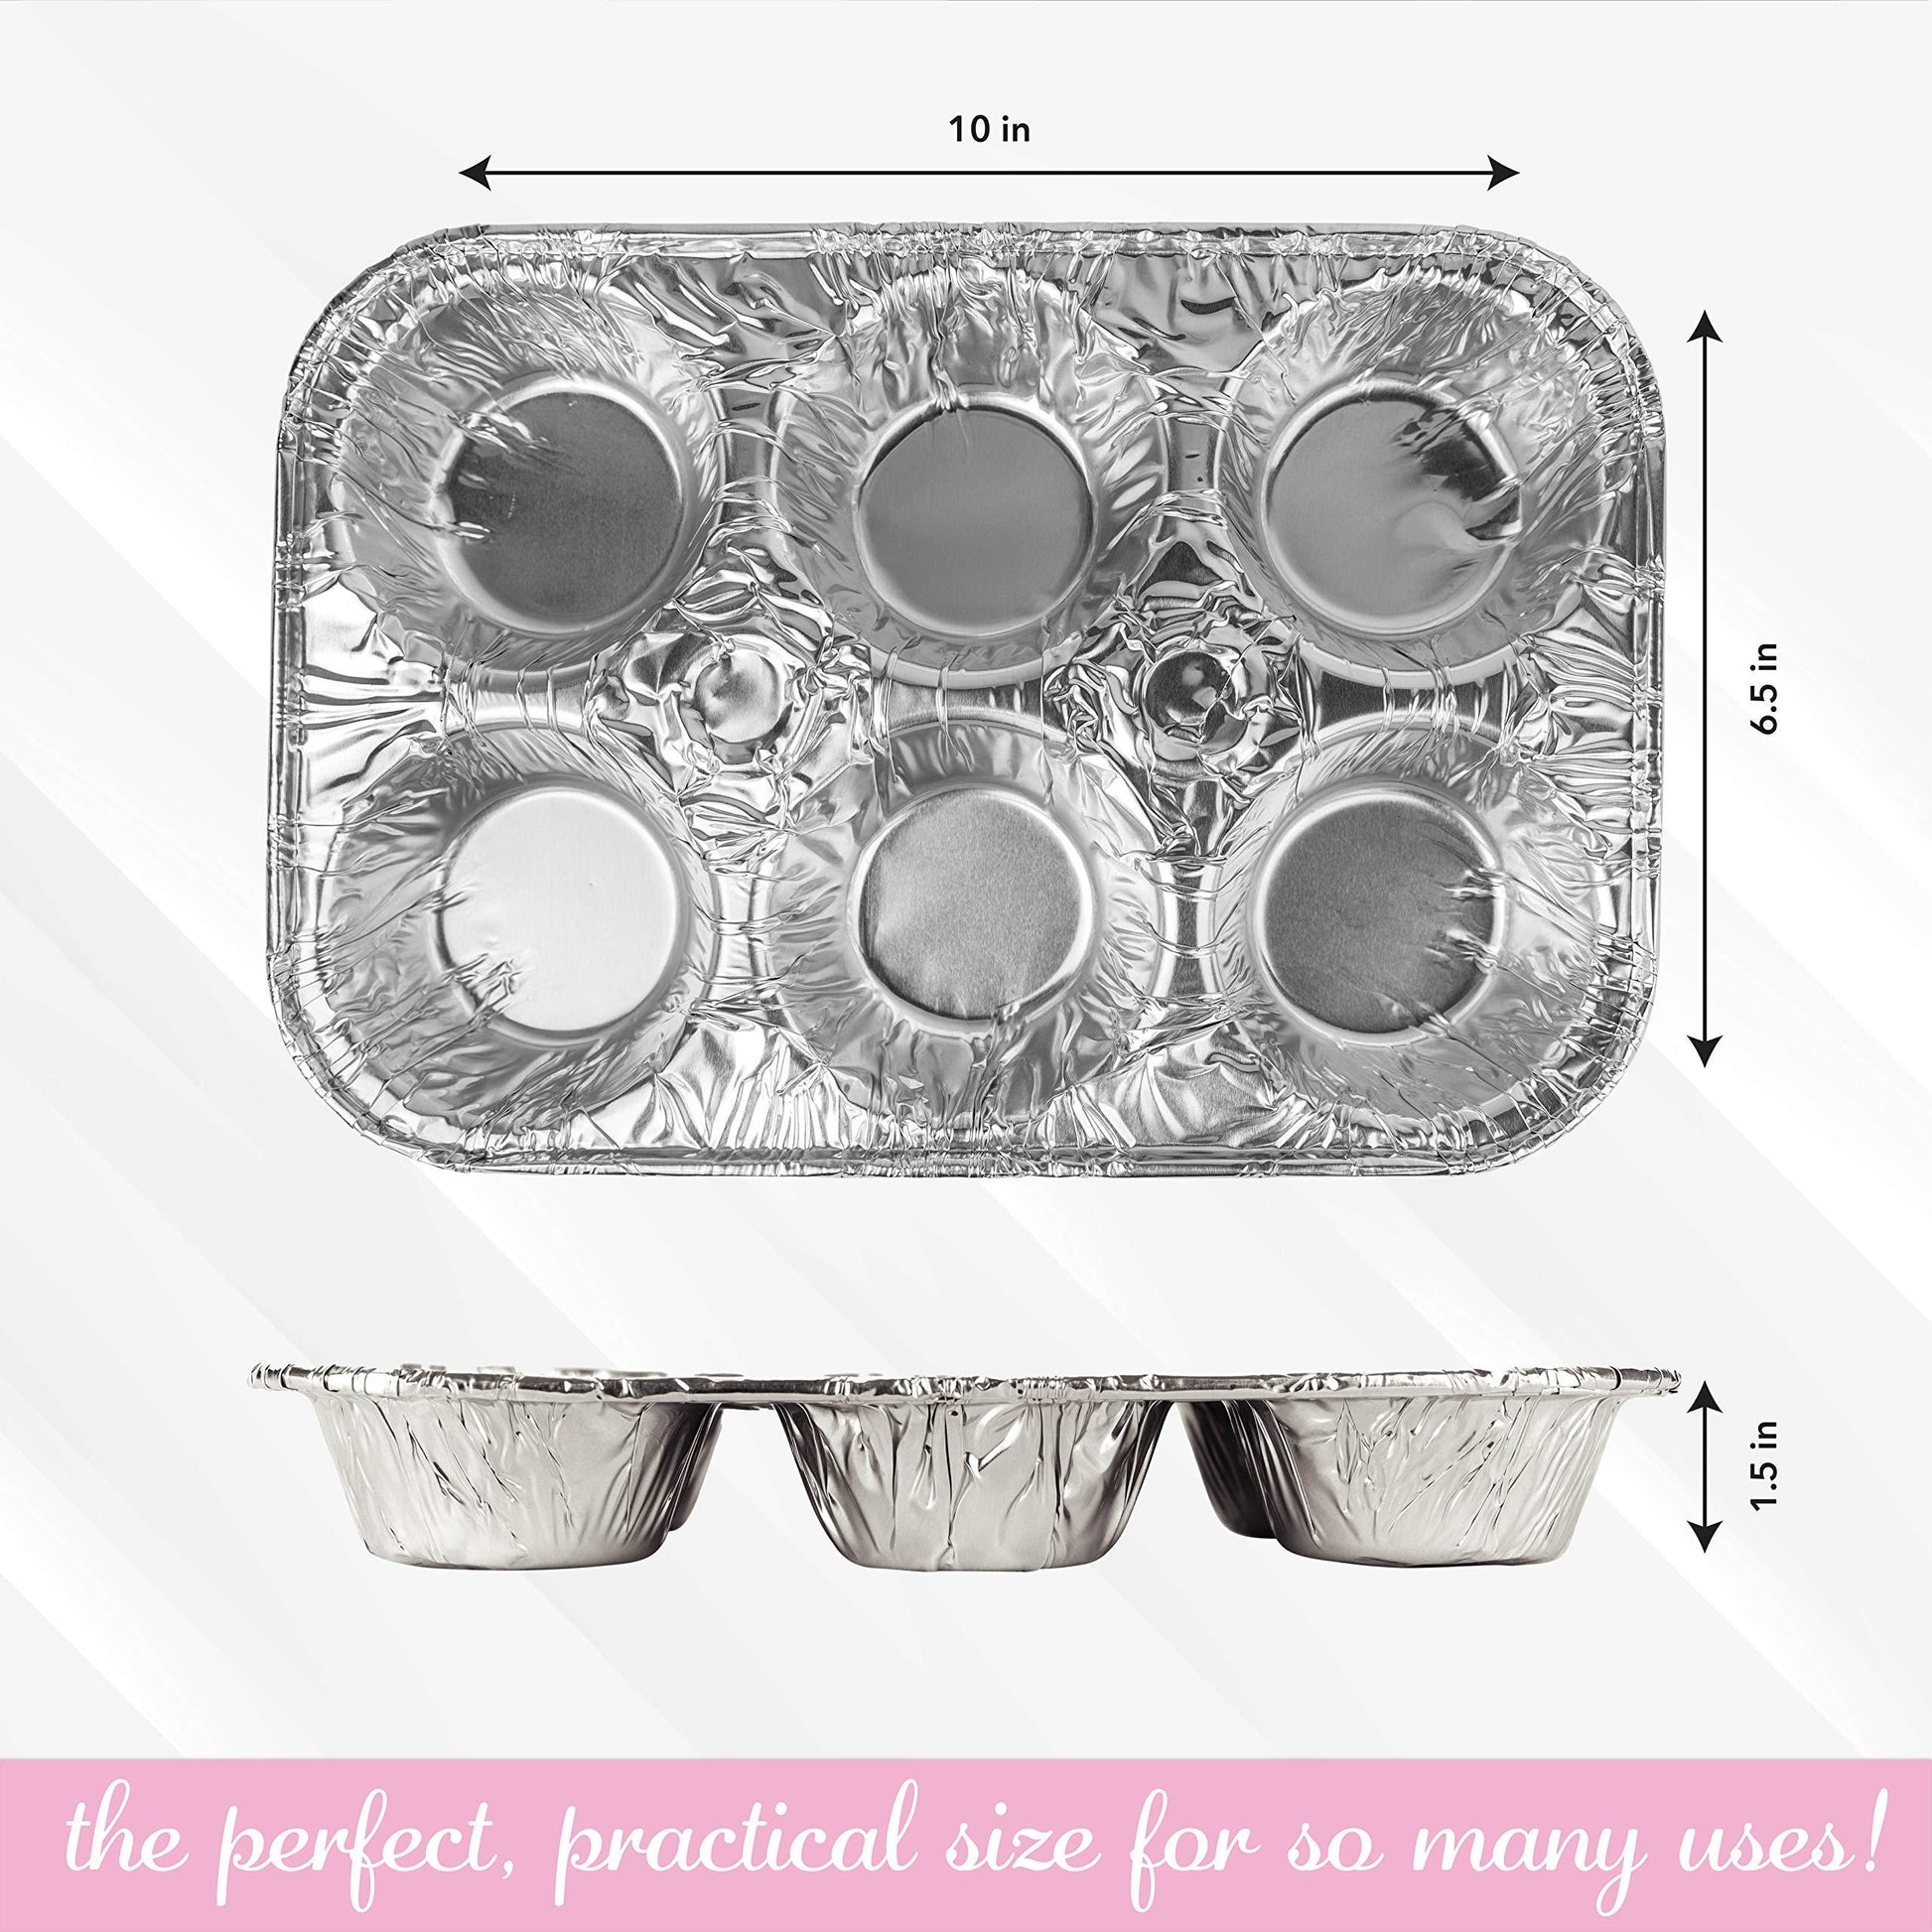 PLASTICPRO Aluminum Foil Muffin Pans Reusable and Disposable, Holds 6 Cupcakes/Muffin & Pie foil Pan Pack of 10 - CookCave